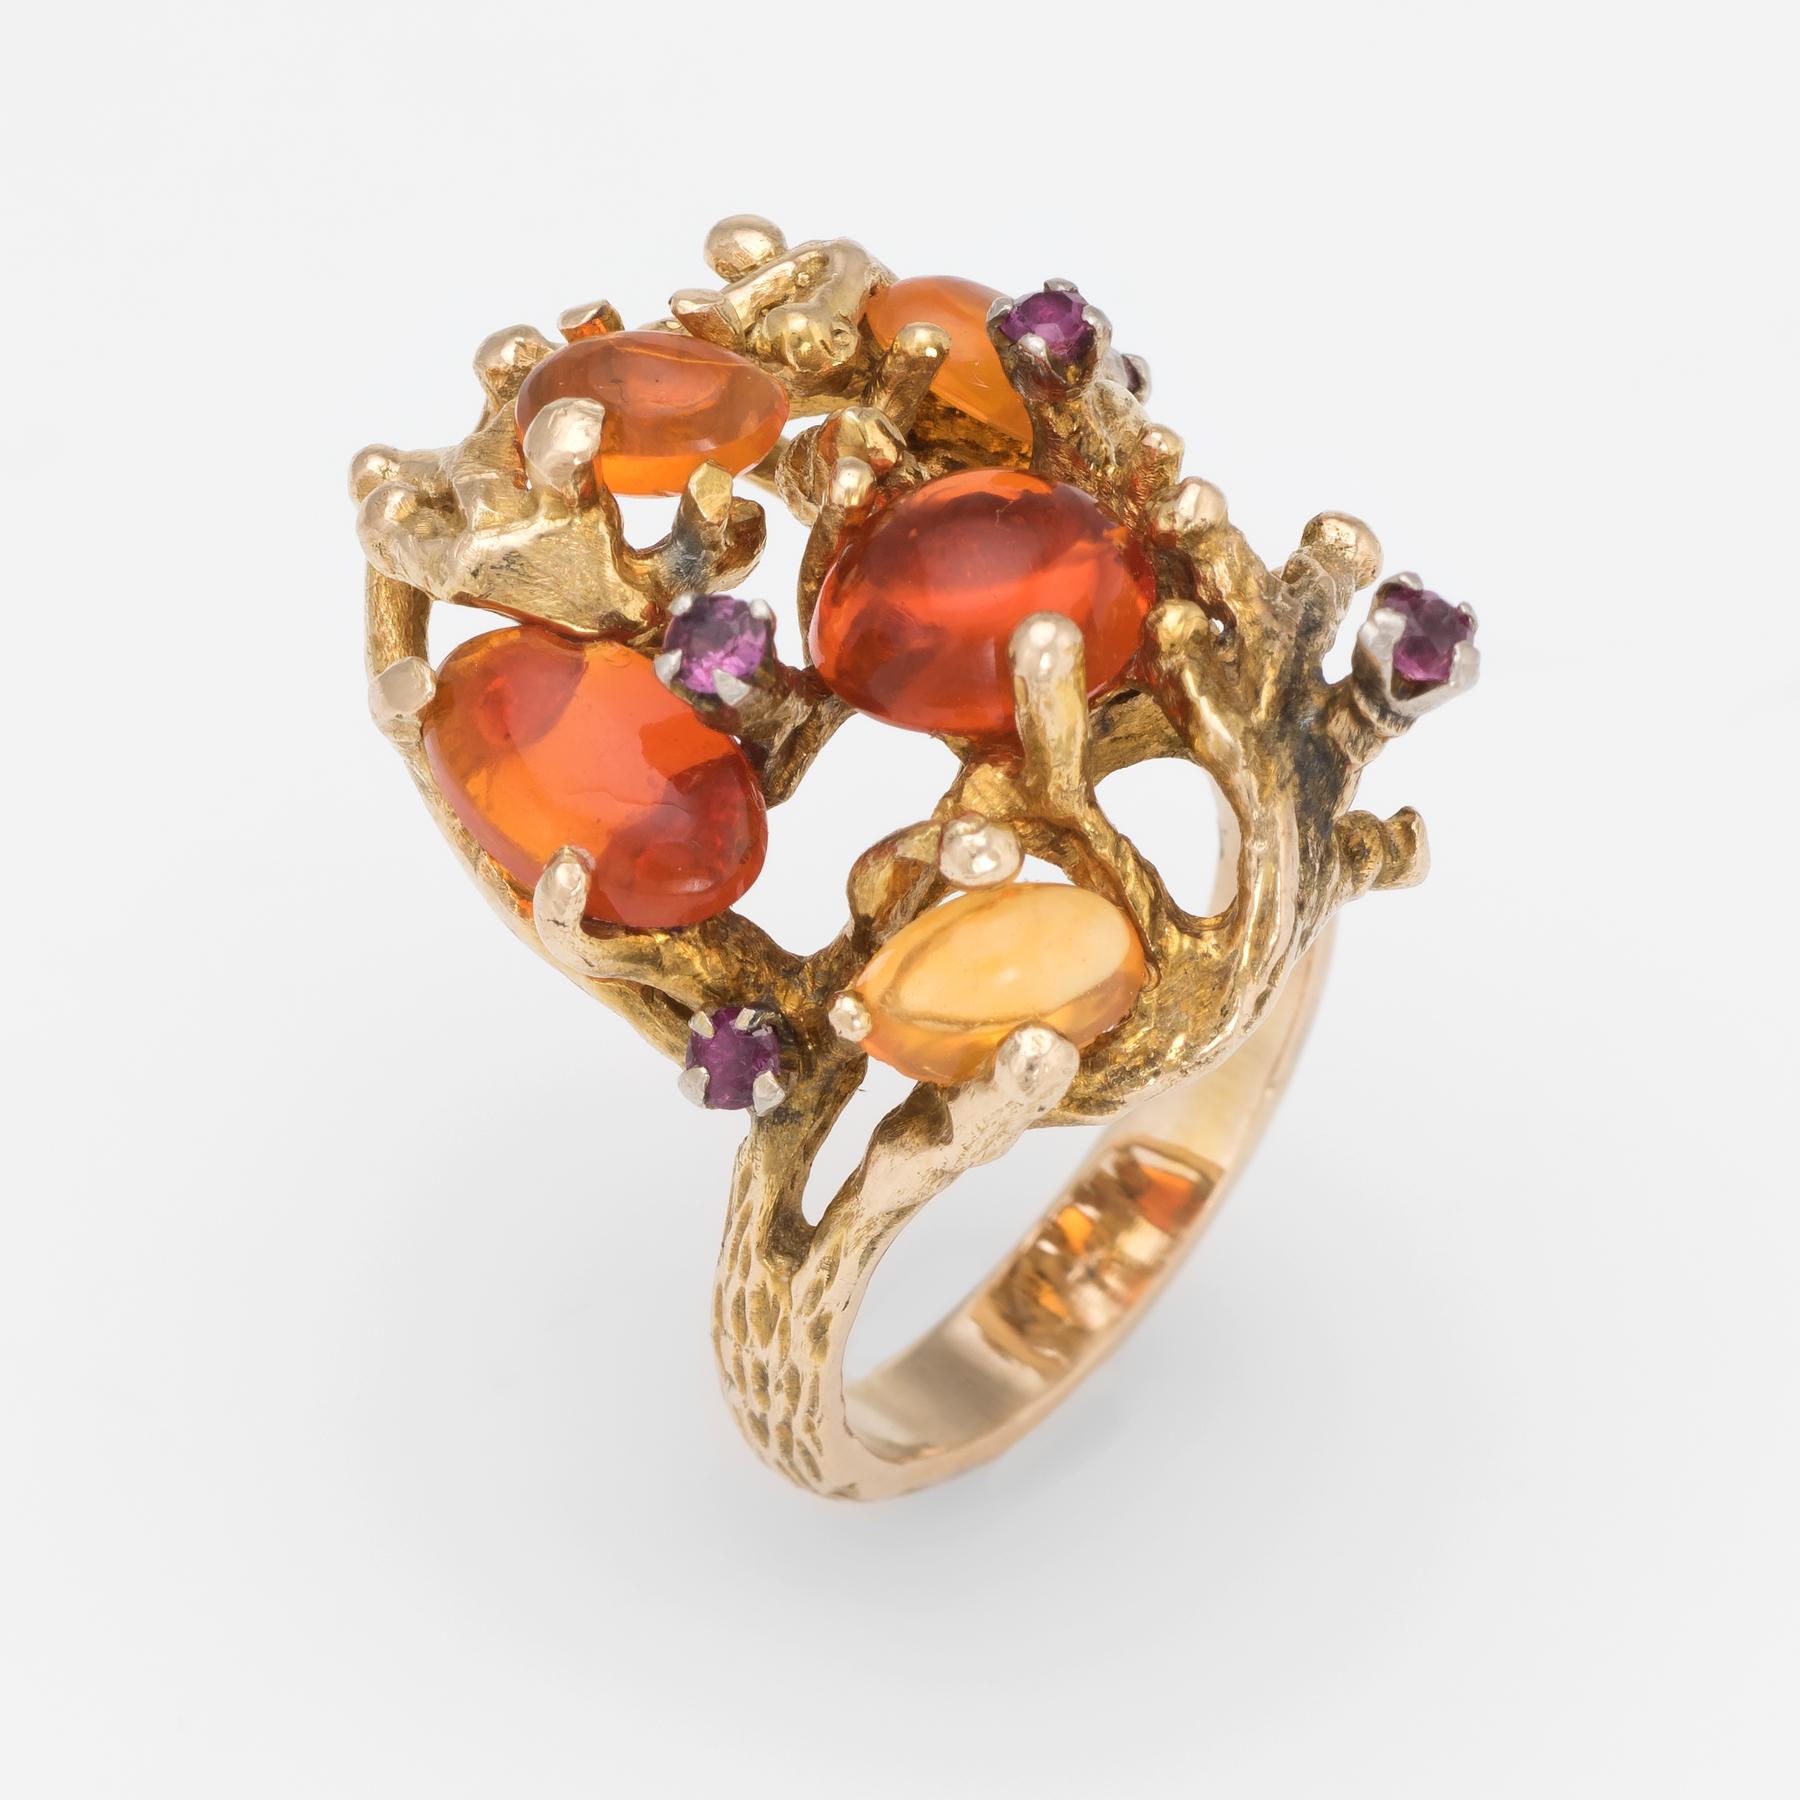 Finely detailed vintage Mexican fire opal and ruby ring (circa 1970s), crafted in 14 karat yellow gold. 

Mexican fire opals range in size from 0.40 to 1.50 carats. The total opal weight is estimated at 4 carats. The 5 rubies total an estimated 0.10